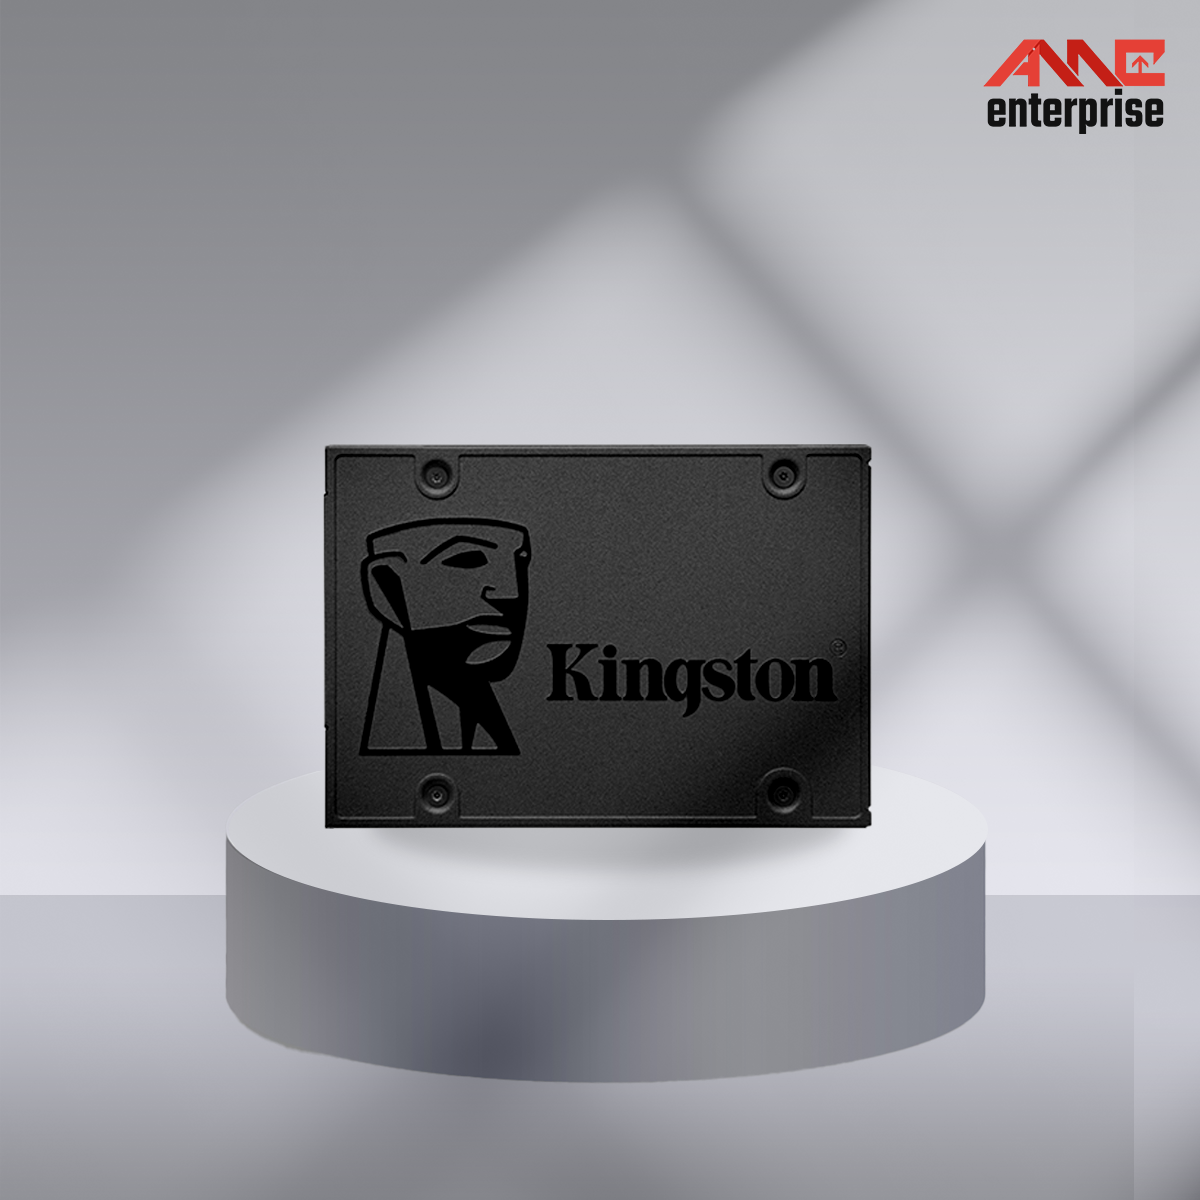 KINGSTON A400 SOLID STATE DRIVE 240GB.png